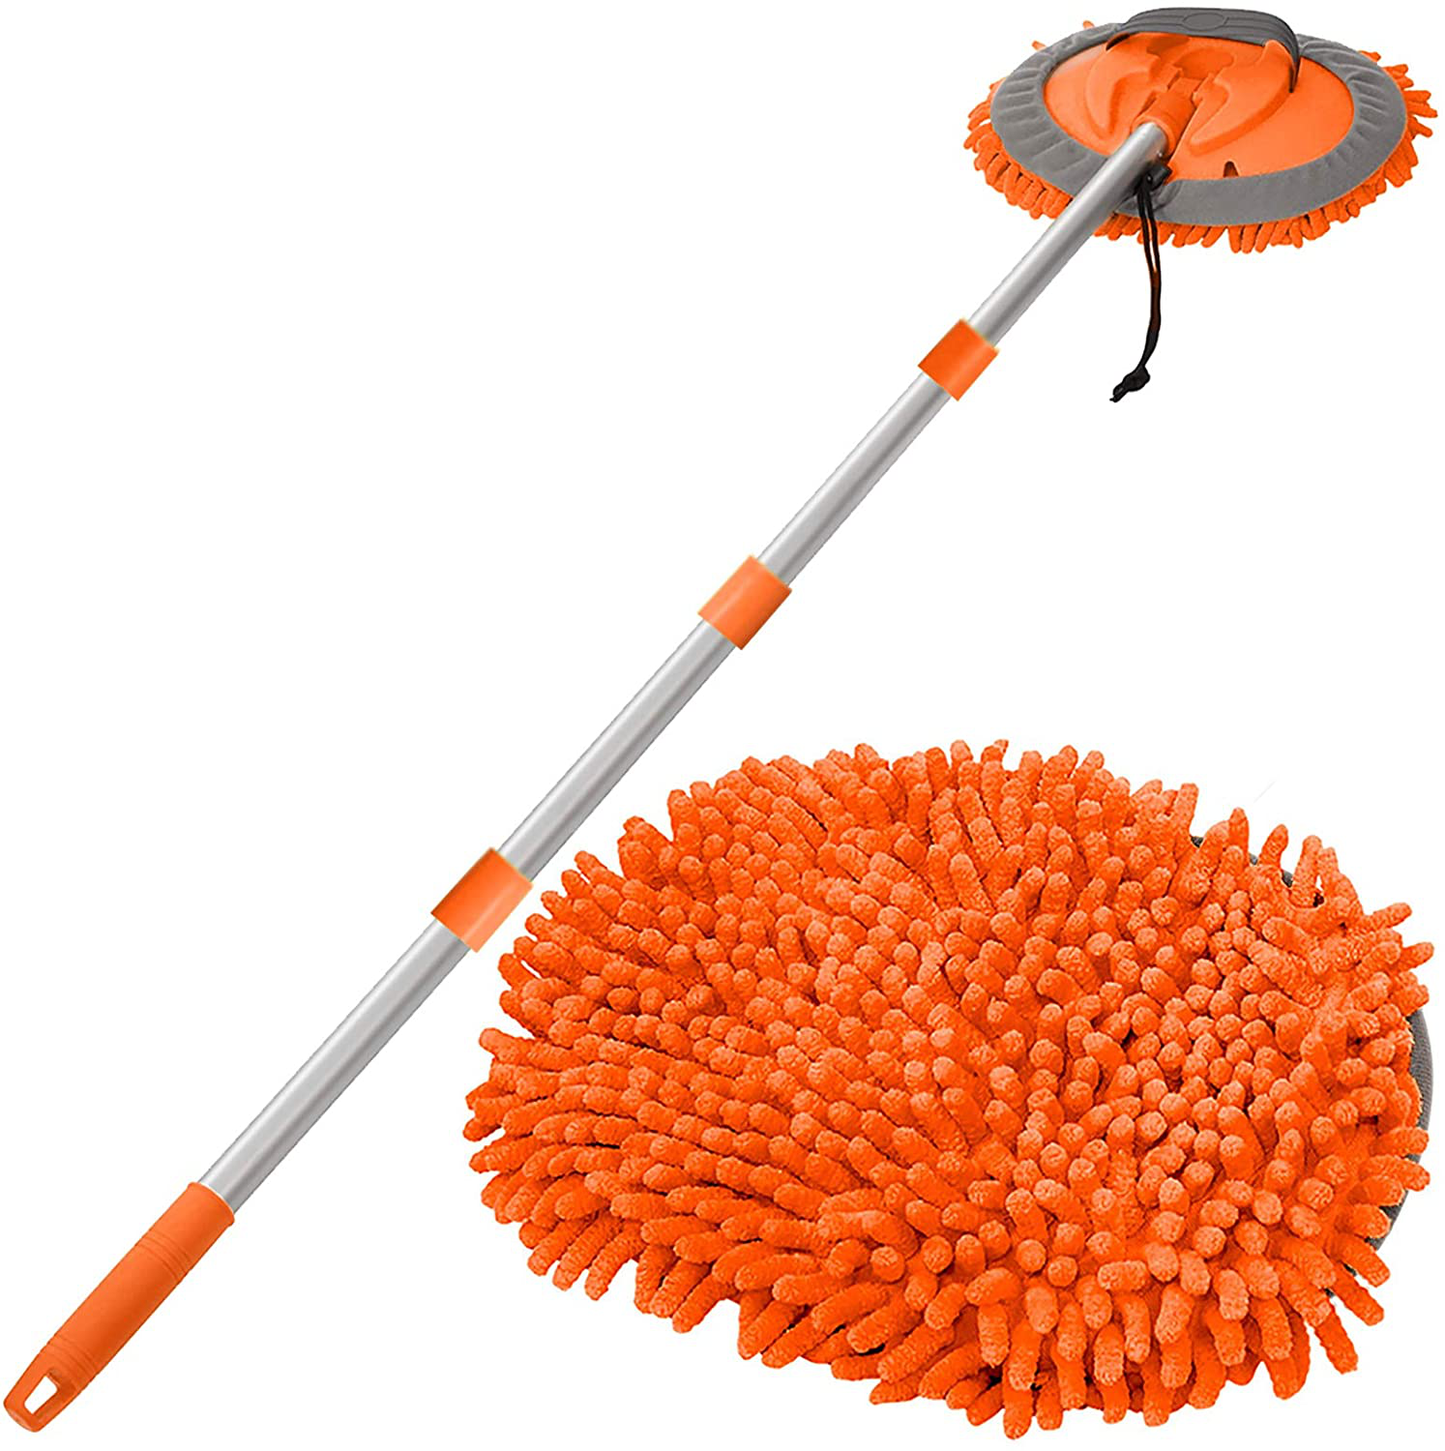 WillingHeart 63" Car Wash Mop Brush Tool Mitt with Long Handle Length More Suitable for Washing American Cars Truck, SUV, RV, Trailer, 2 in 1 Chenille Microfiber Duster Not Hurt Paint Scratch Free